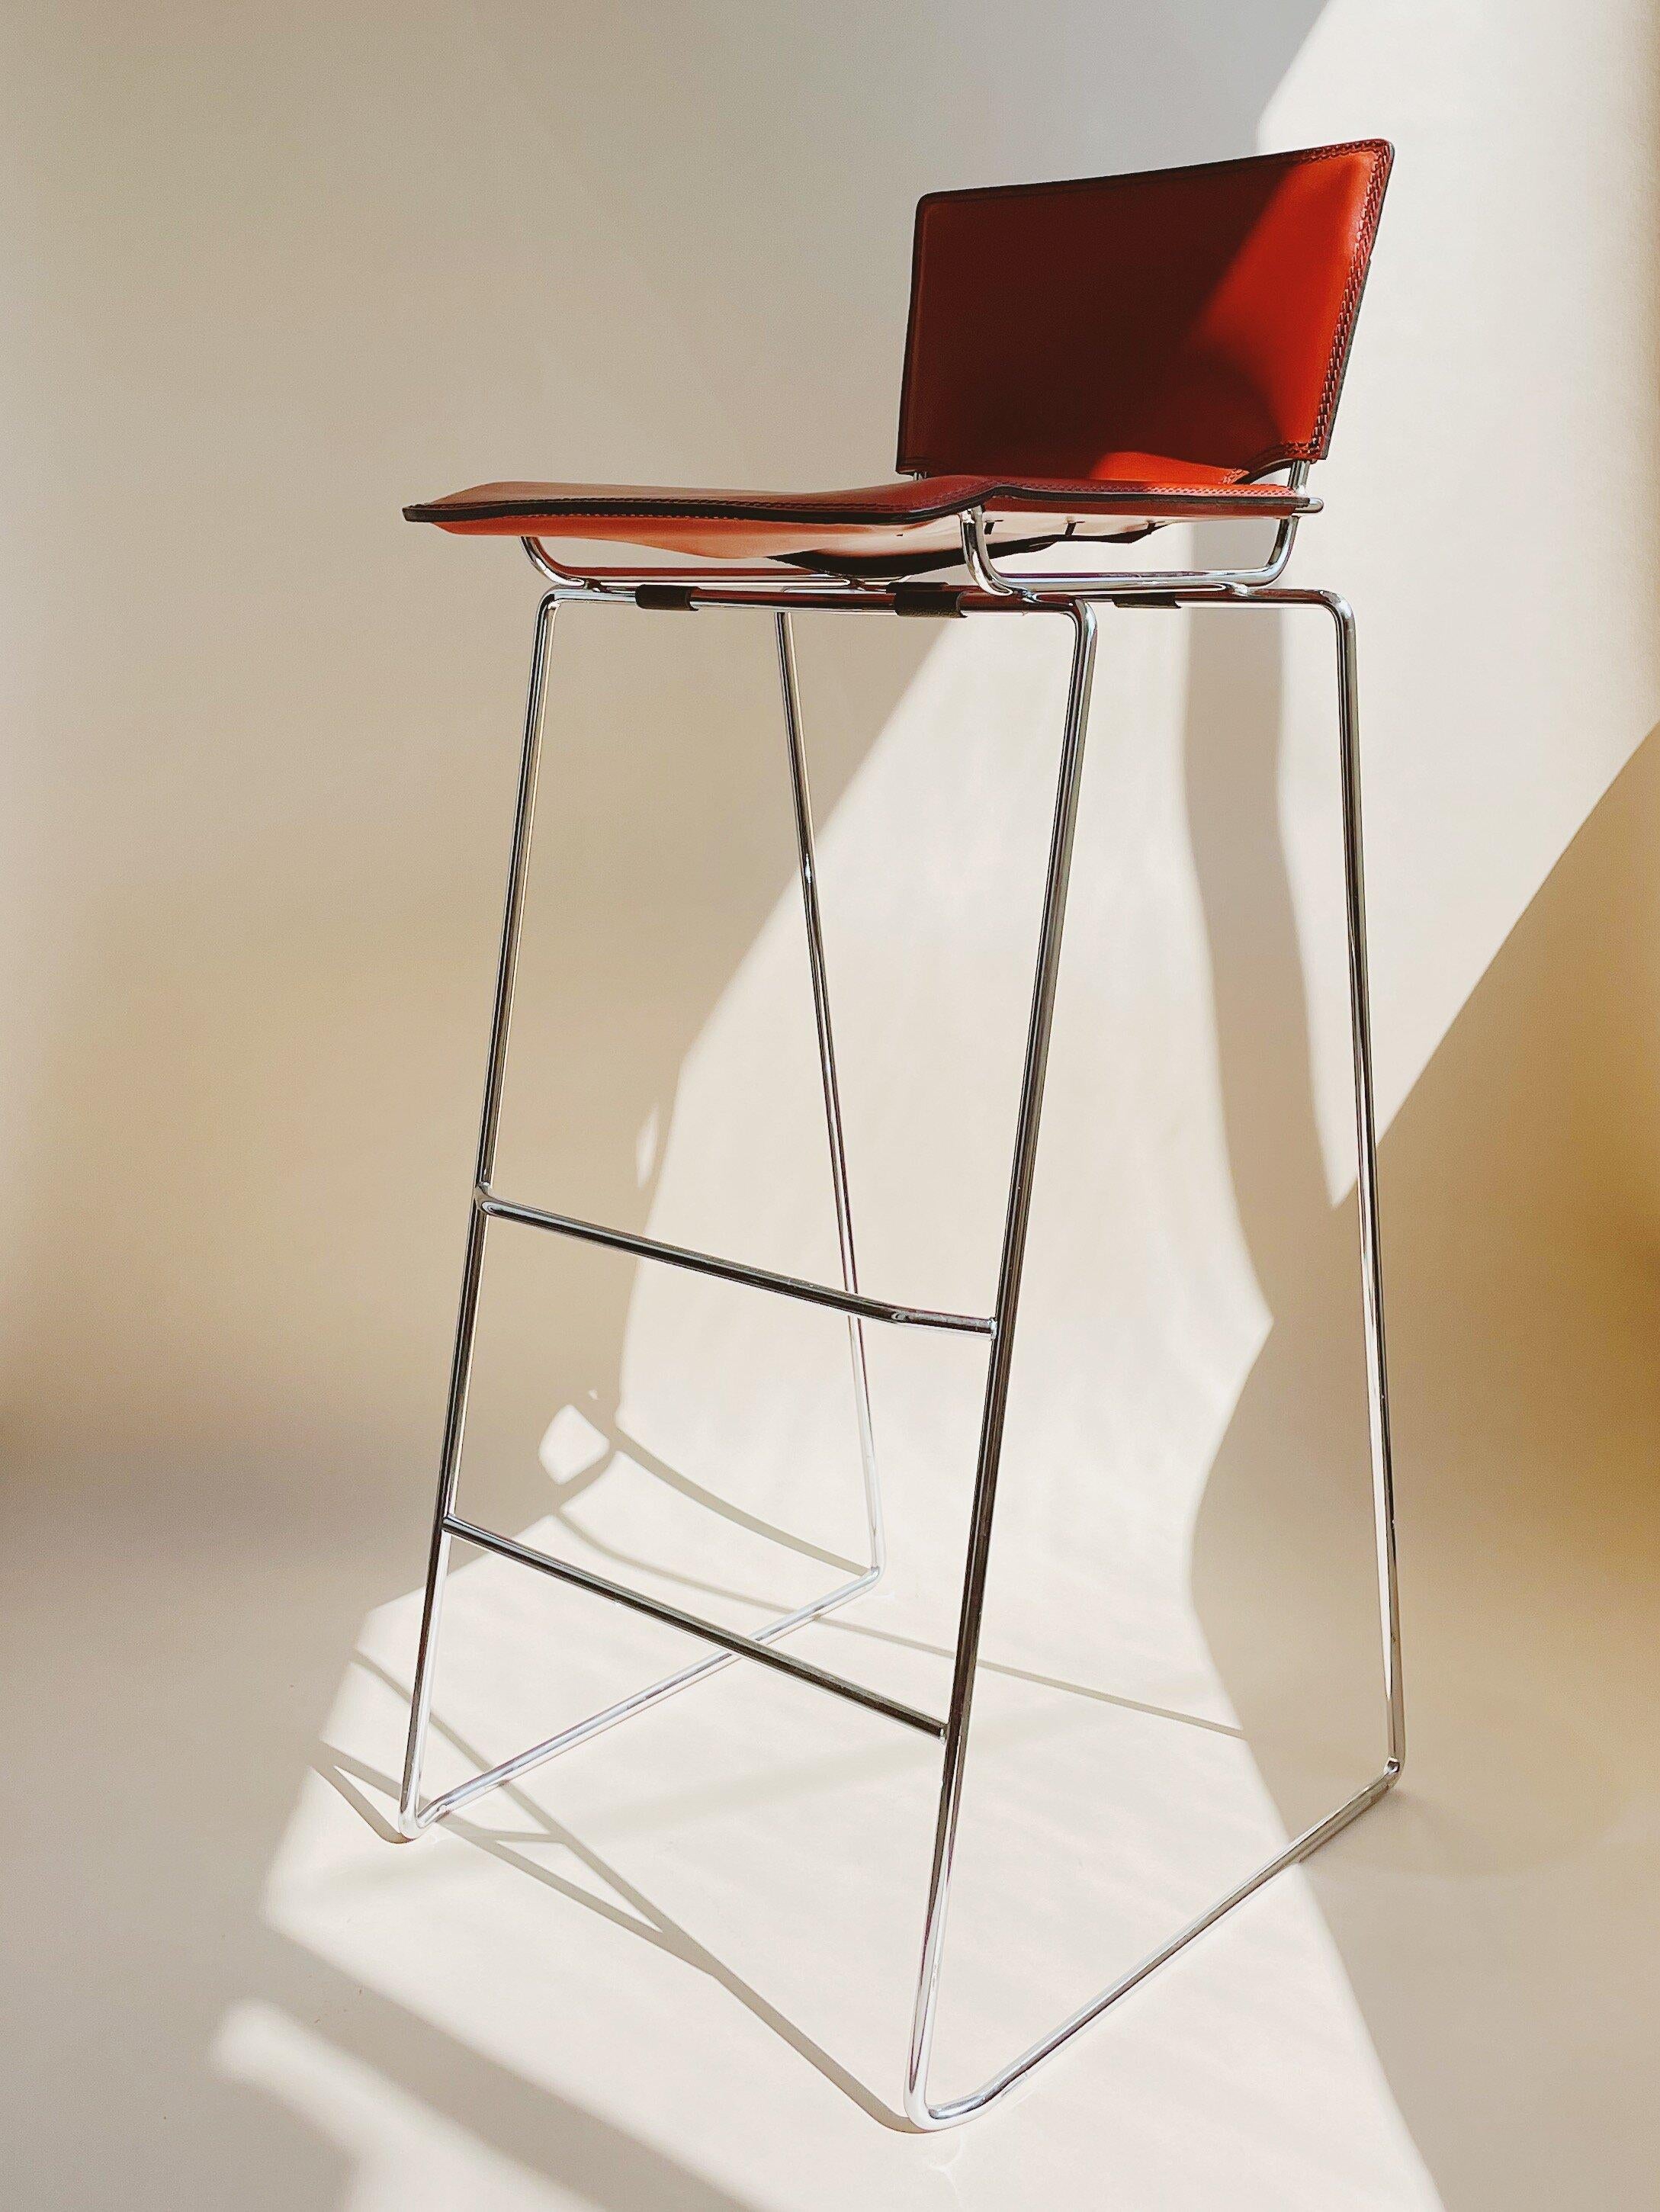 Toyoda Hiroyuki for ICF Group c. 1980

Set of three vermilion red leather stools designed by Toyoda Hiroyki for ICF Group. Saddle stitched Italian leather on a chrome frame with a lace up back. Stools stack for easy storage.

Measures 34.5” tall